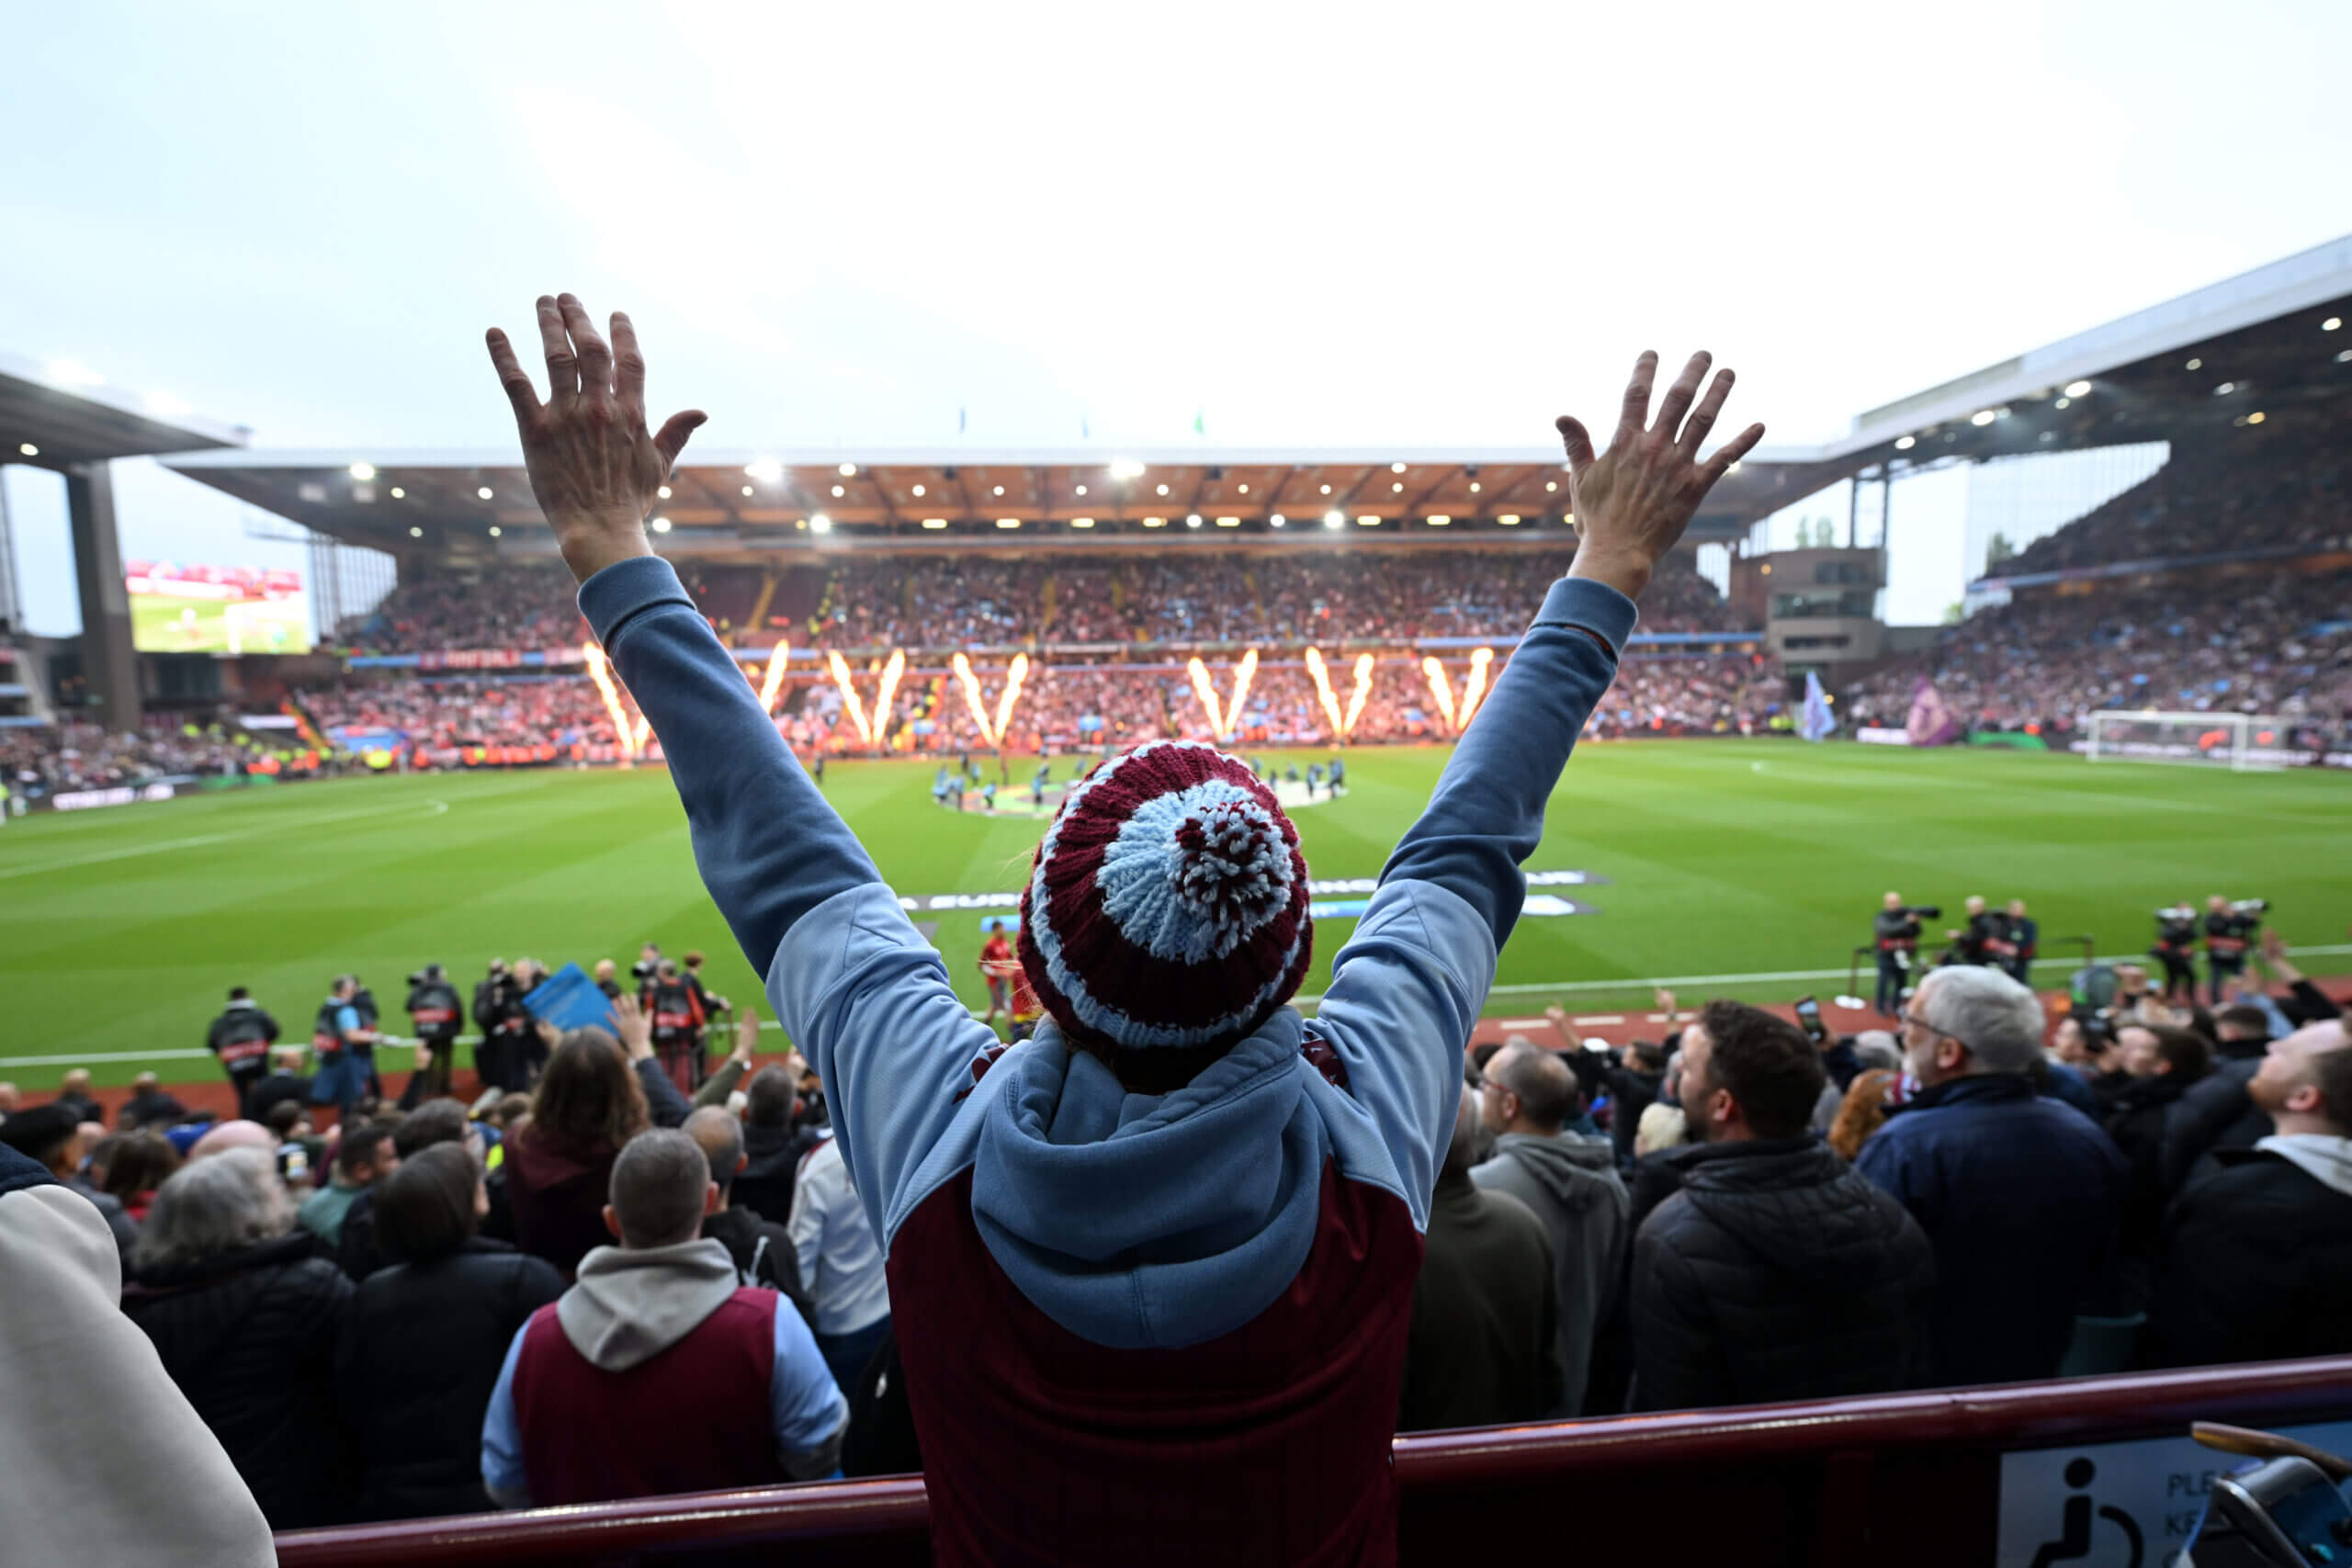 Aston Villa are in the Champions League - this is how they will benefit financially